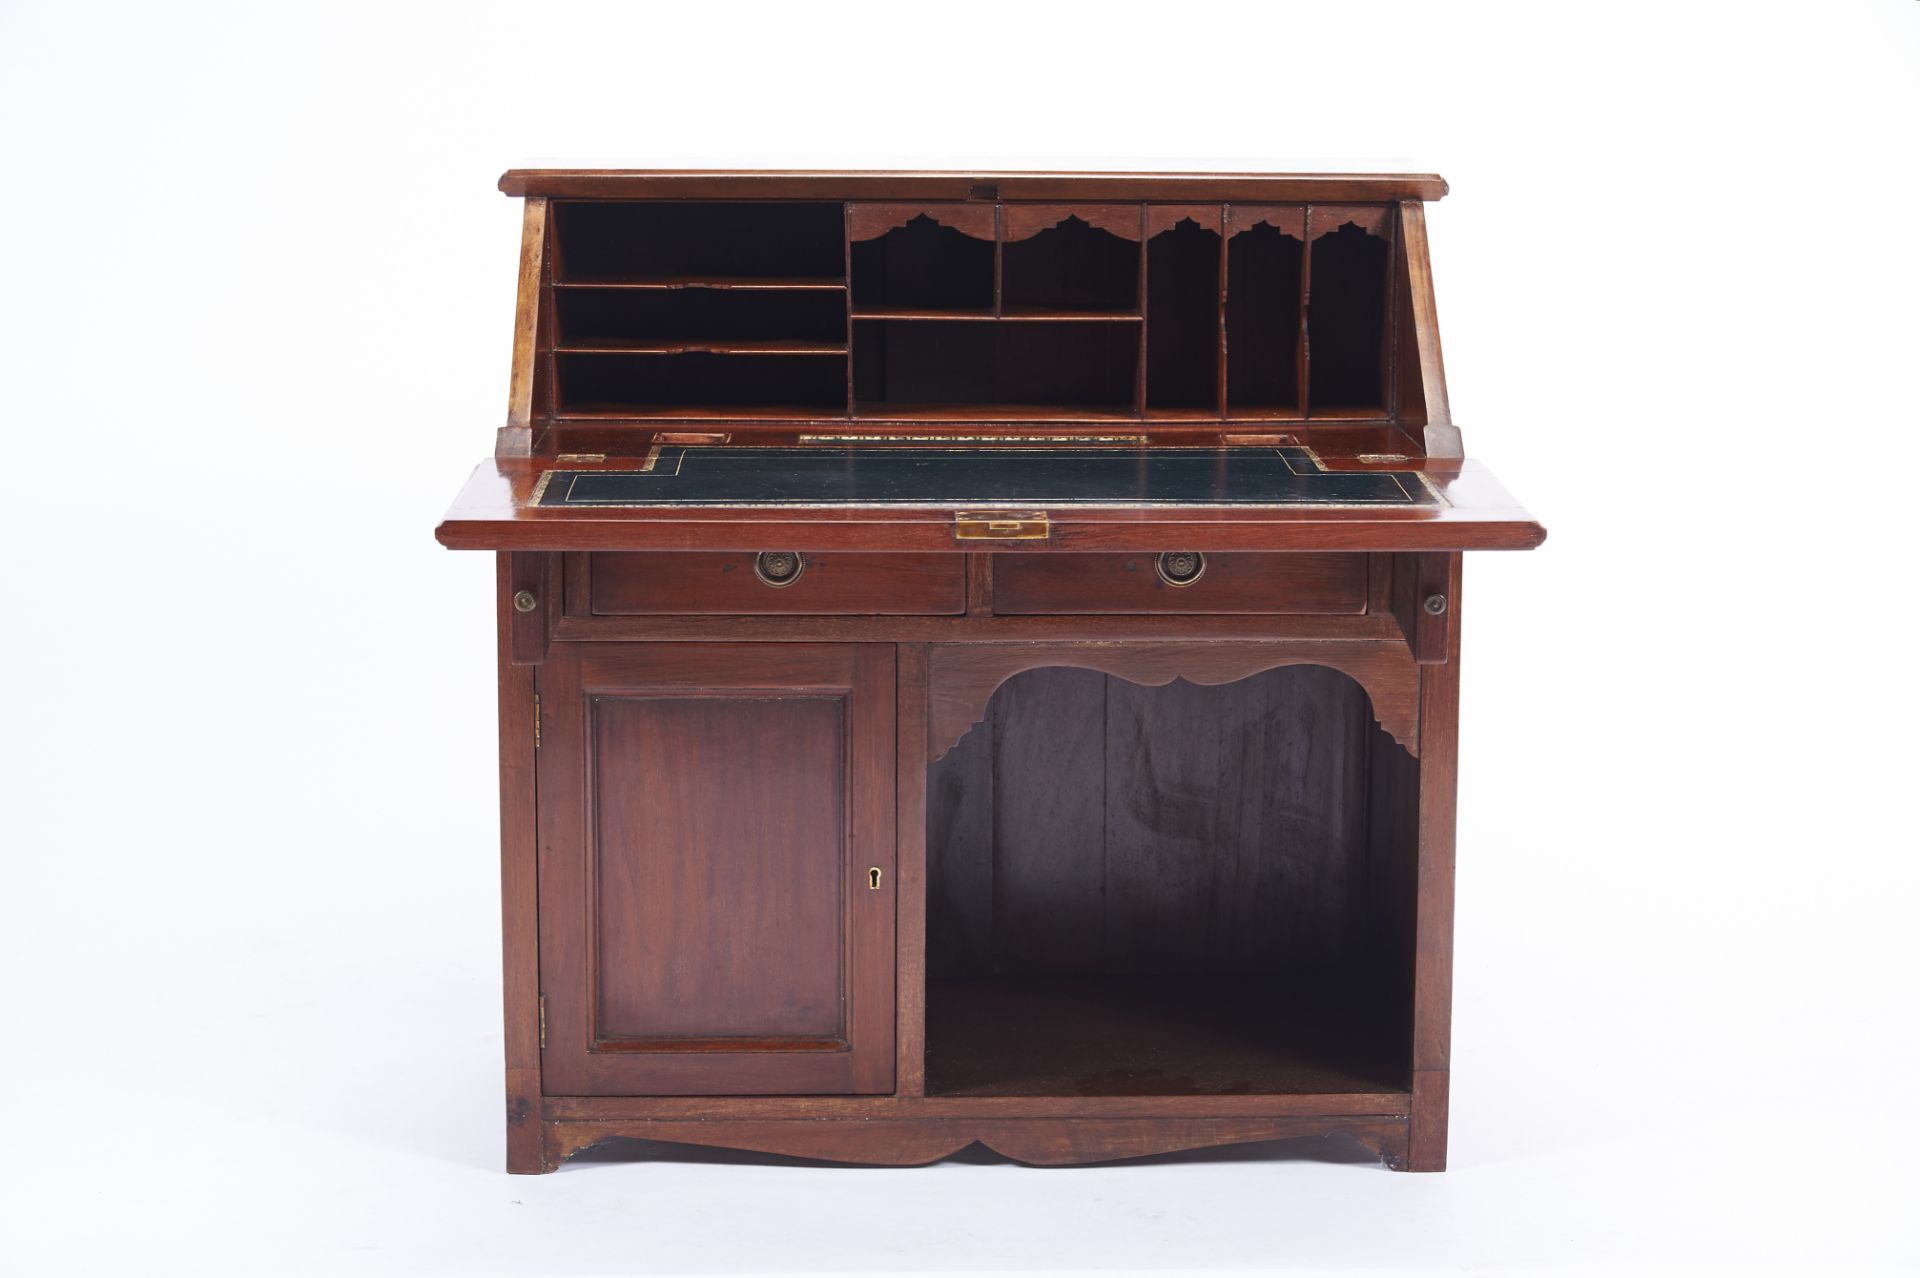 A Small Bureau mahogany lower body with door open space and two drawers interior with pigeon holes